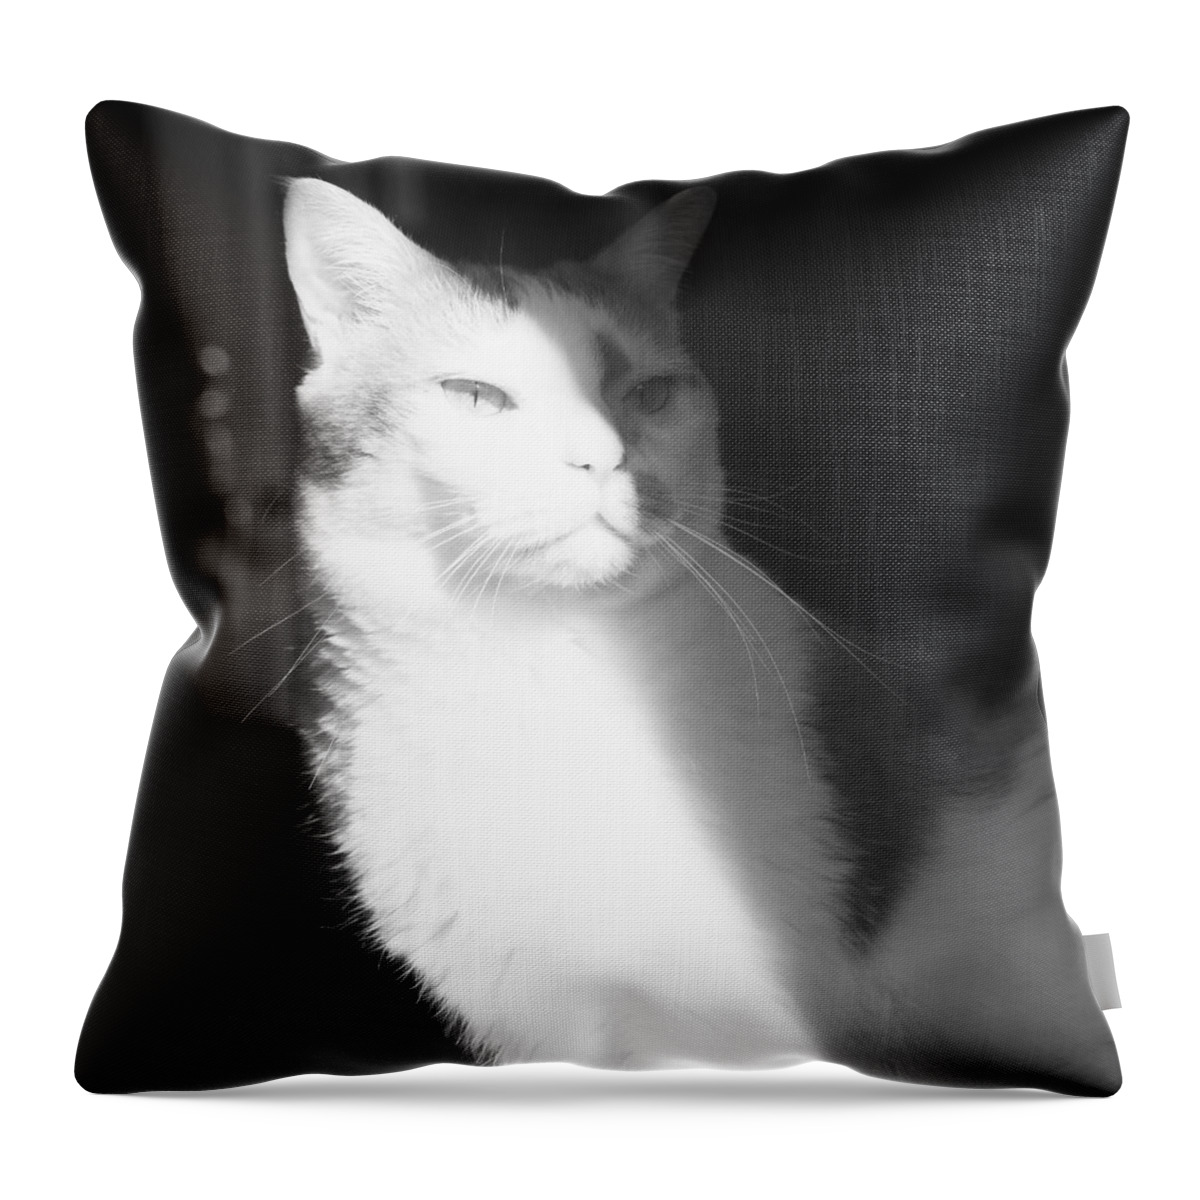 Cat Throw Pillow featuring the photograph Arthouse Kitty by Sharon Popek